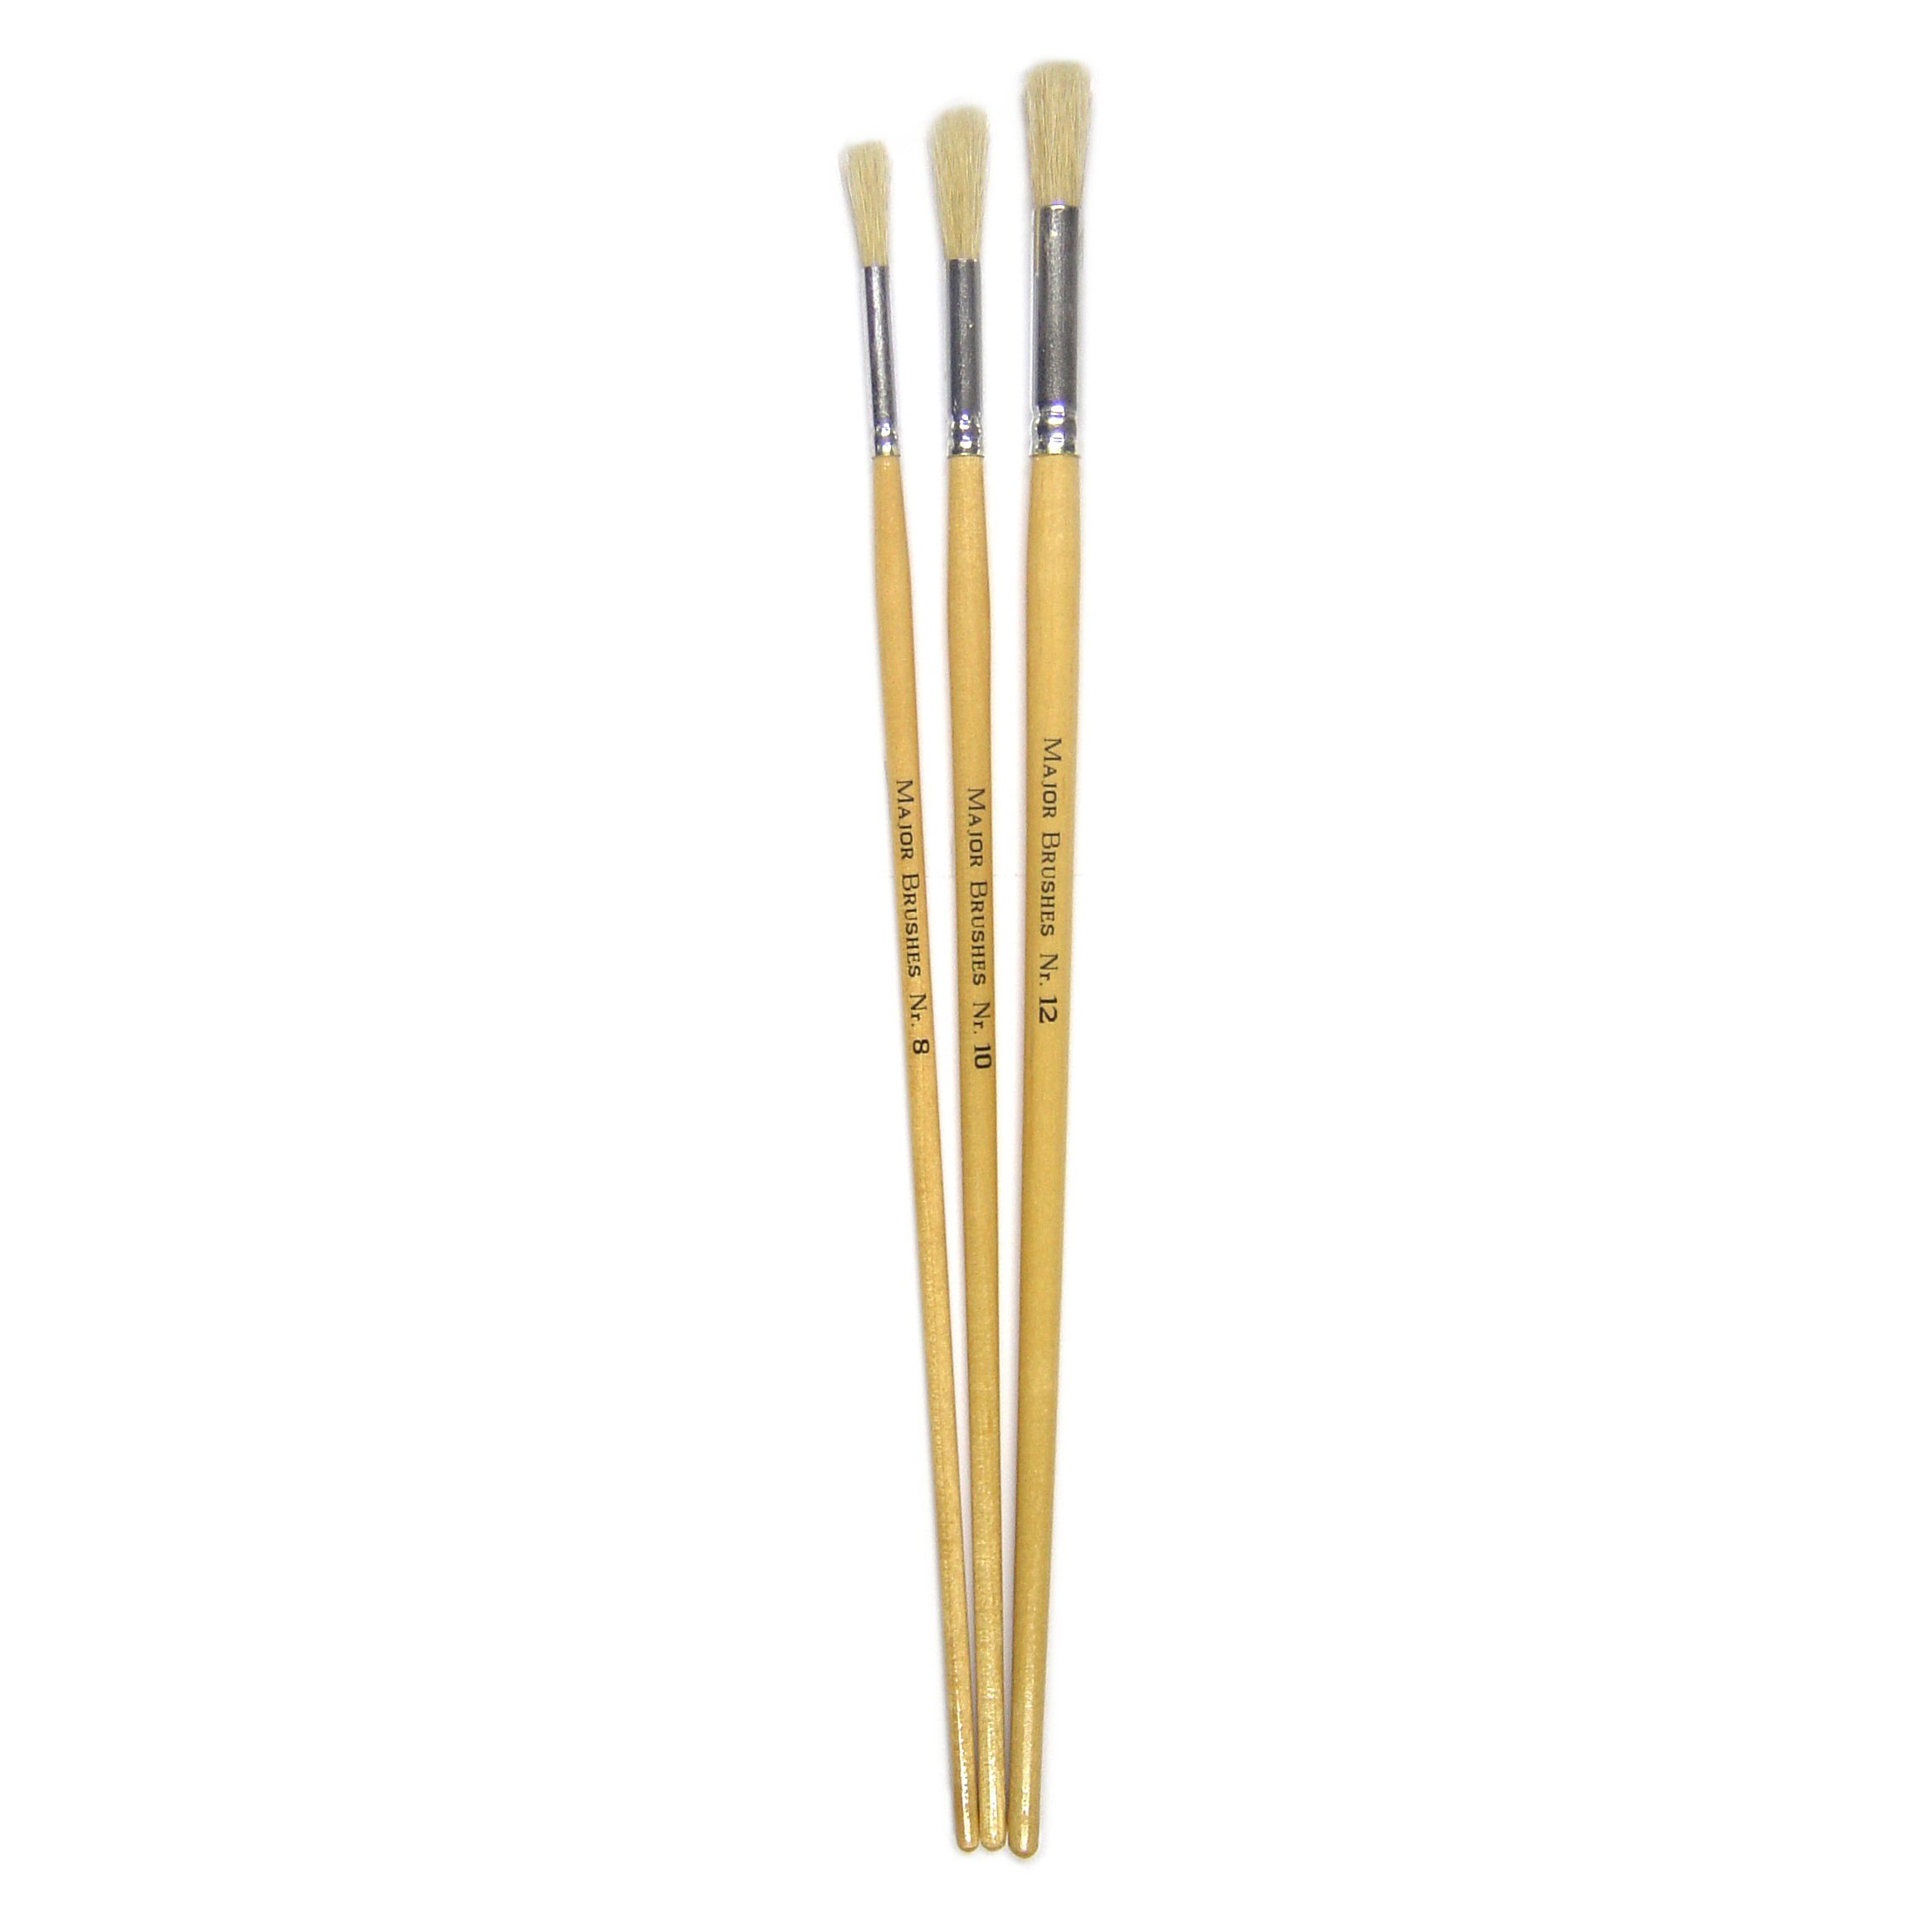 Hog Long Brushes: Round Tip Mixed Set - Set of 30 MB584-30 | Primary ICT